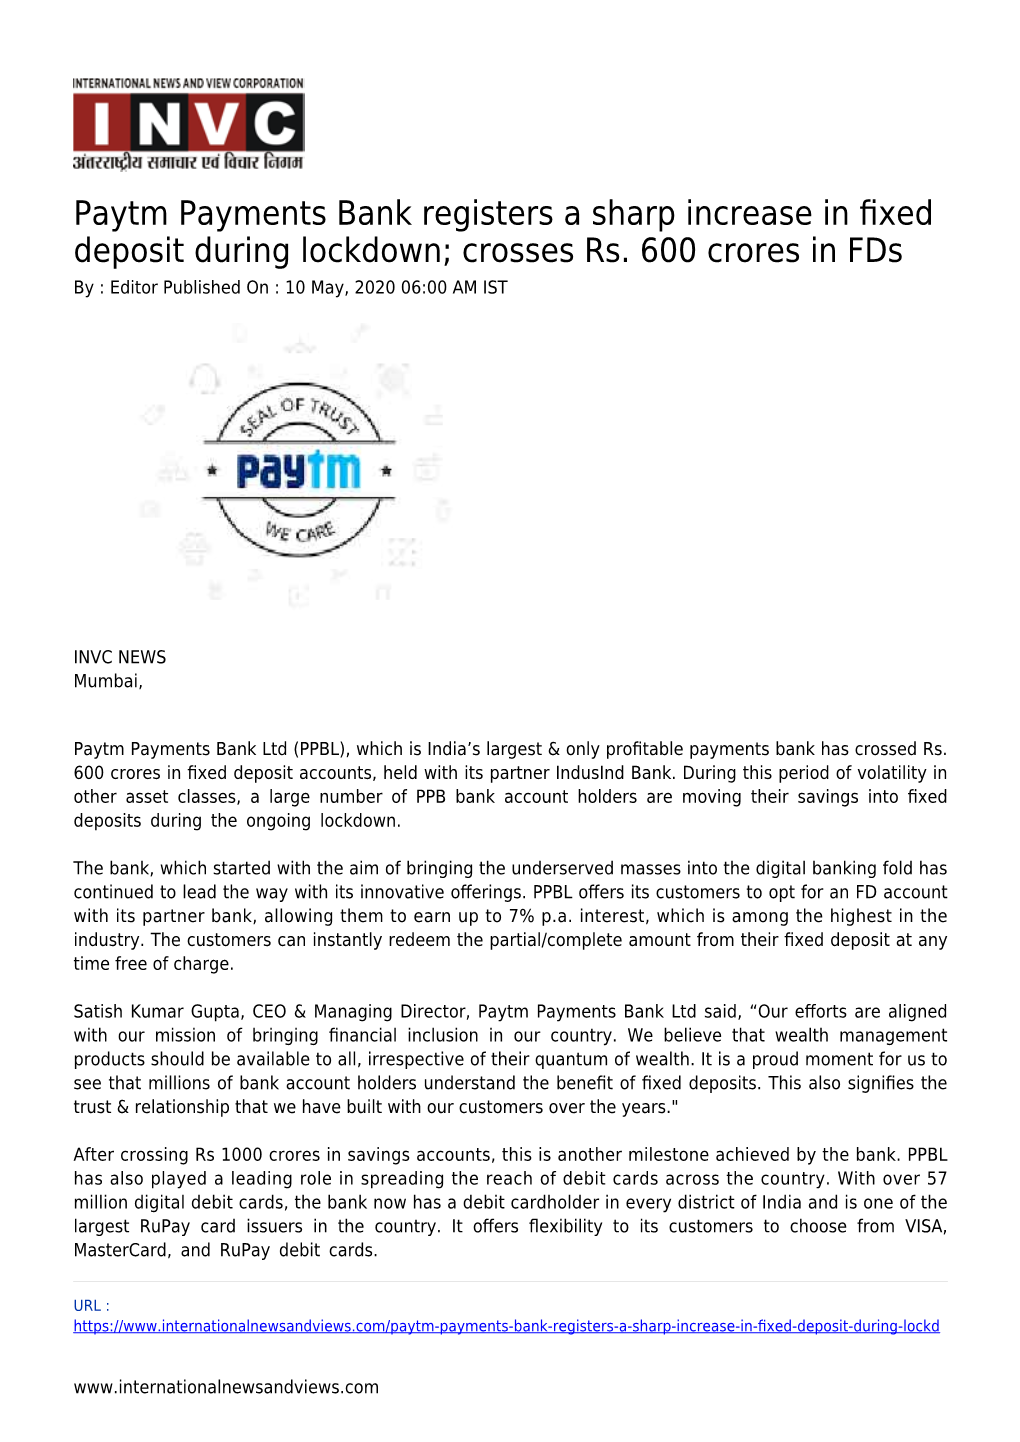 Paytm Payments Bank Registers a Sharp Increase in ﬁxed Deposit During Lockdown; Crosses Rs